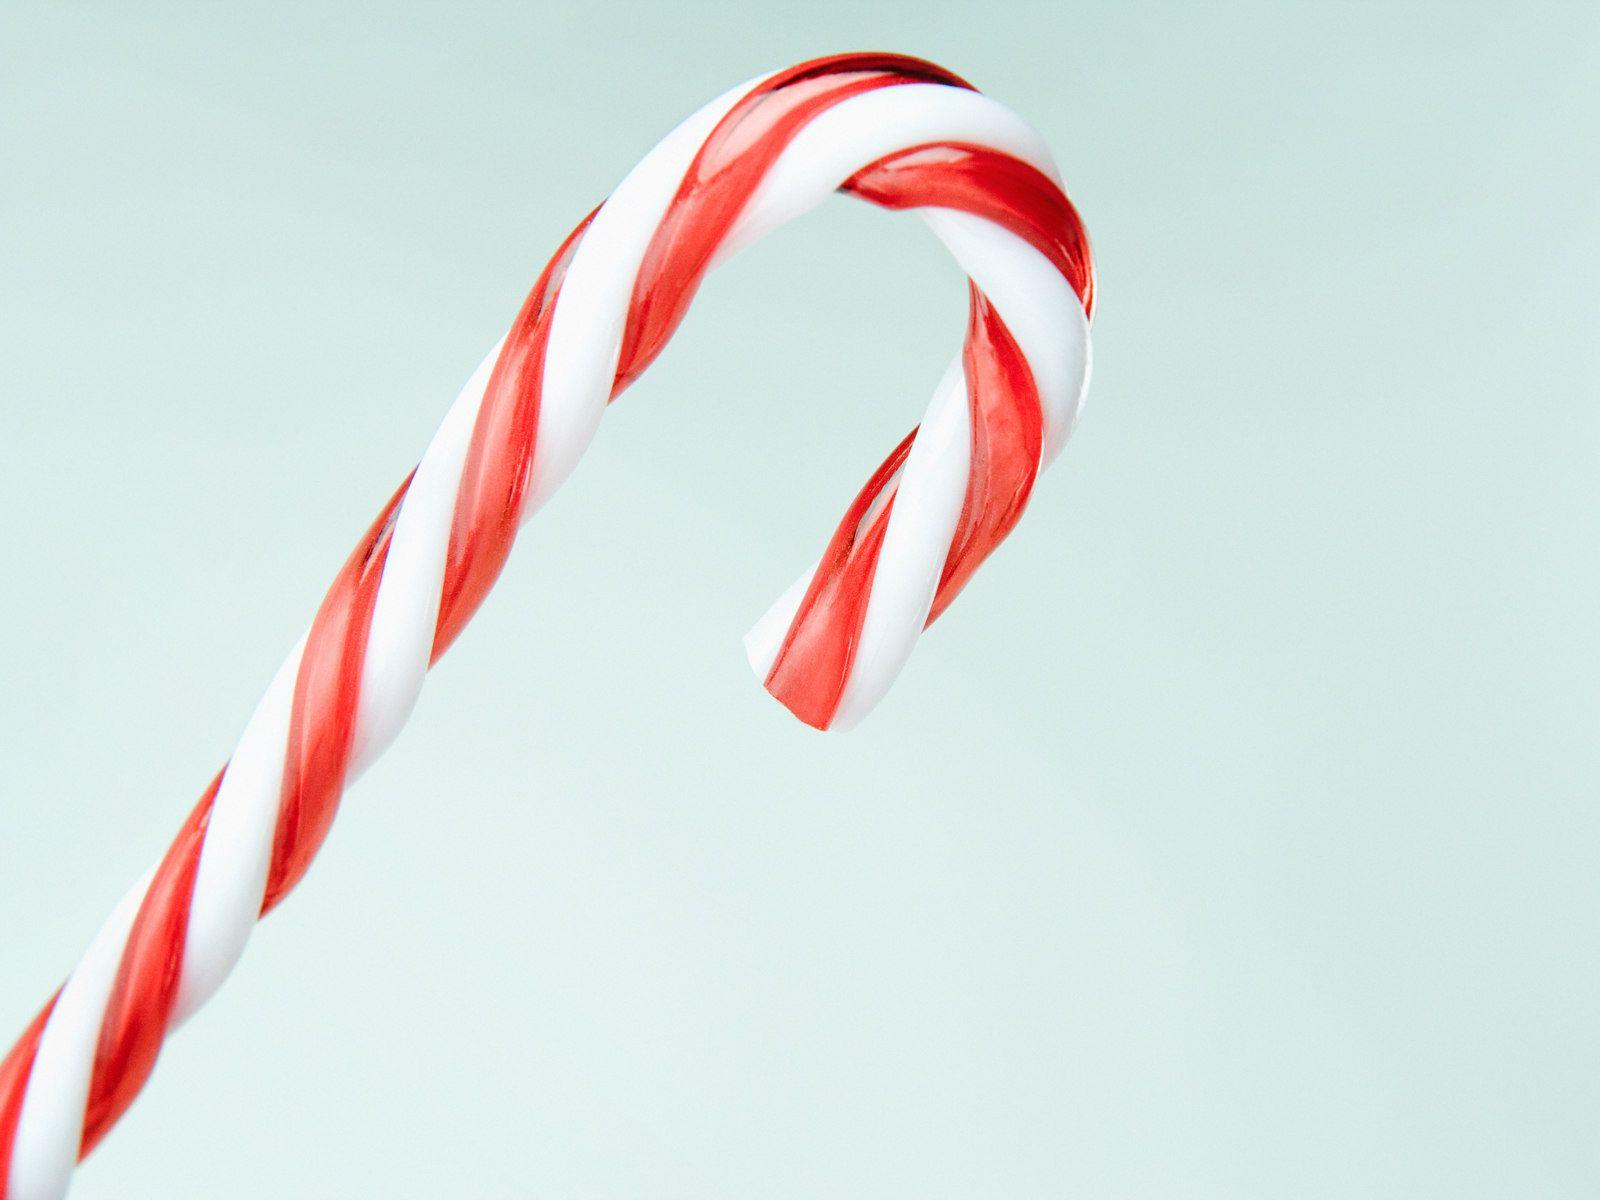 Candy Cane wallpapers